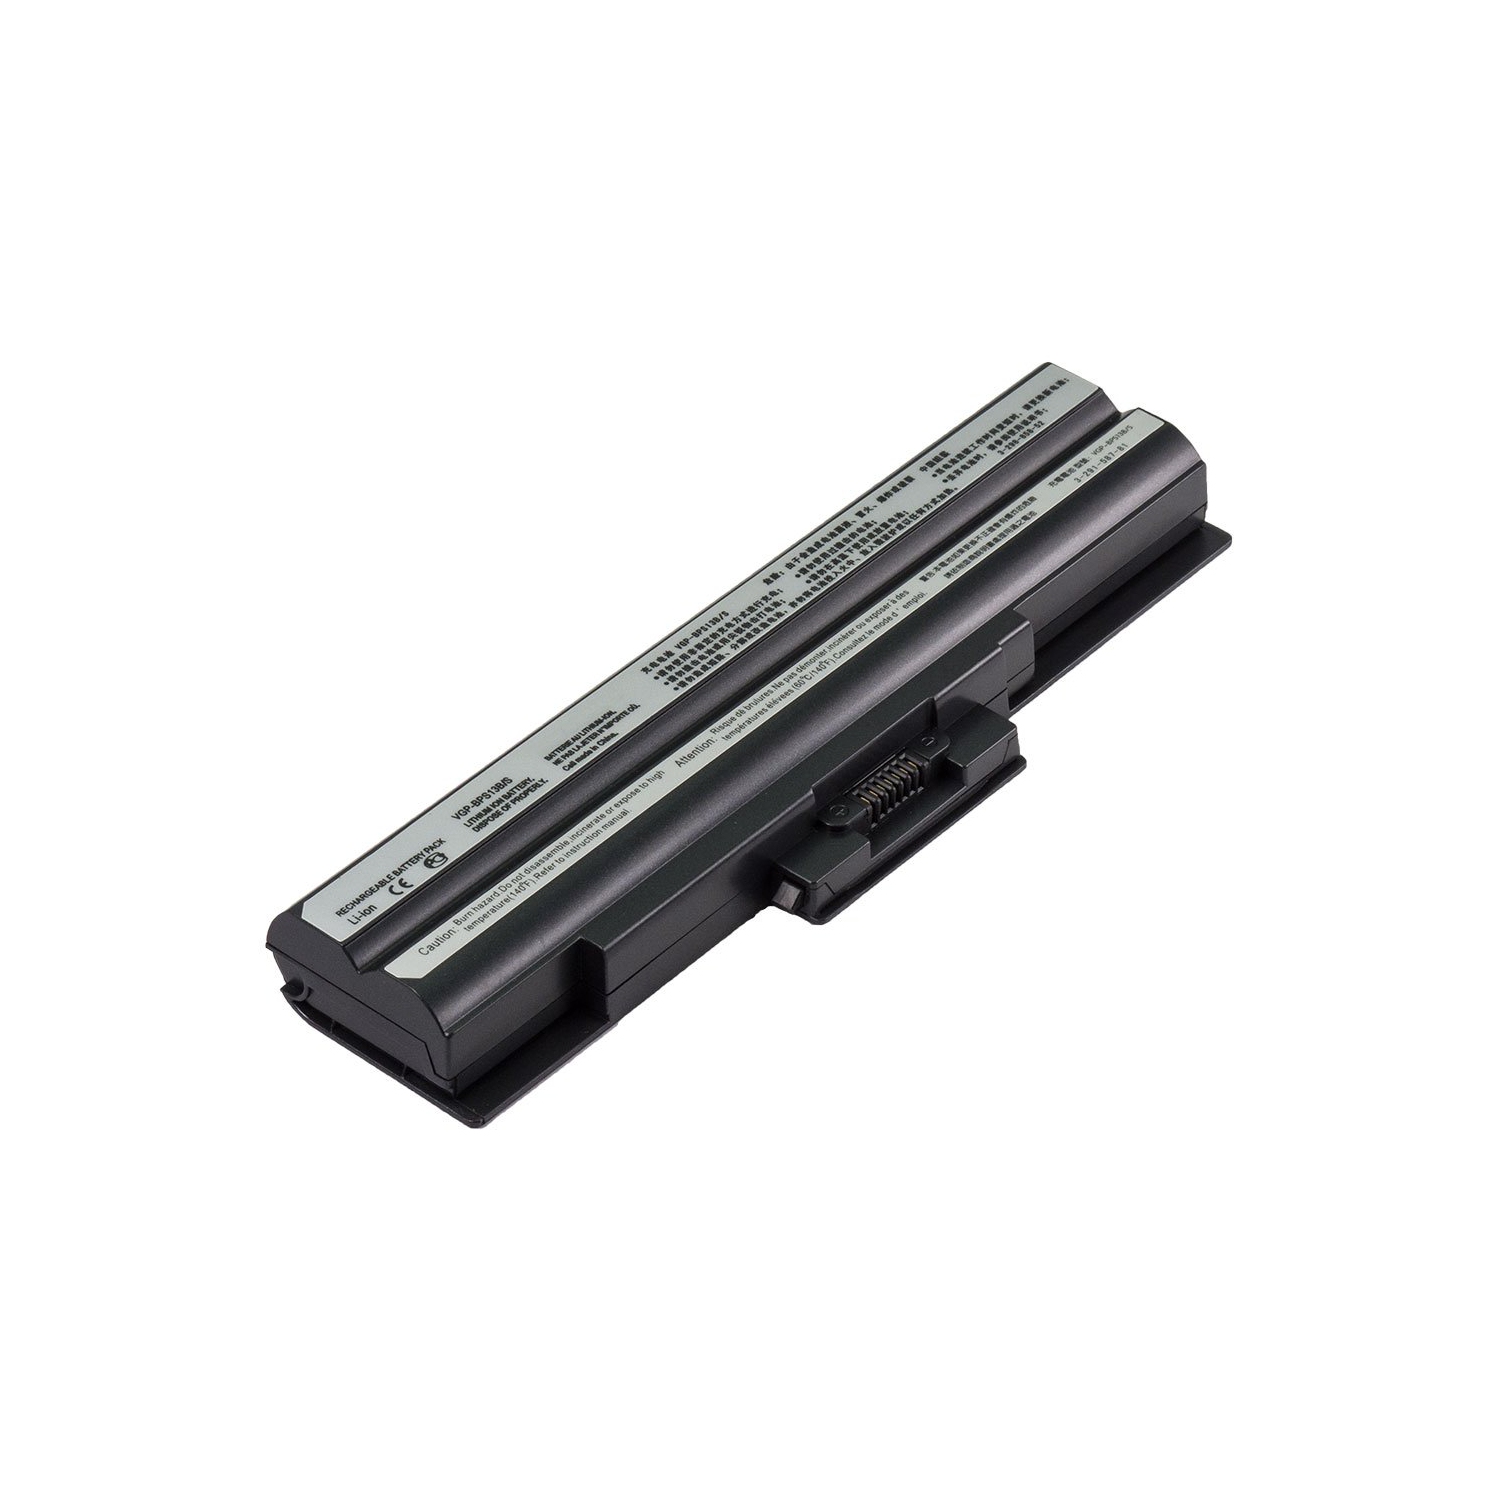 Laptop Battery Replacement for Sony VAIO VGN-FW139N/W, VGP-BPS13, VGP-BPS13/S, VGP-BPS13A/Q, VGP-BPS13B/B, VGP-BSP13/S